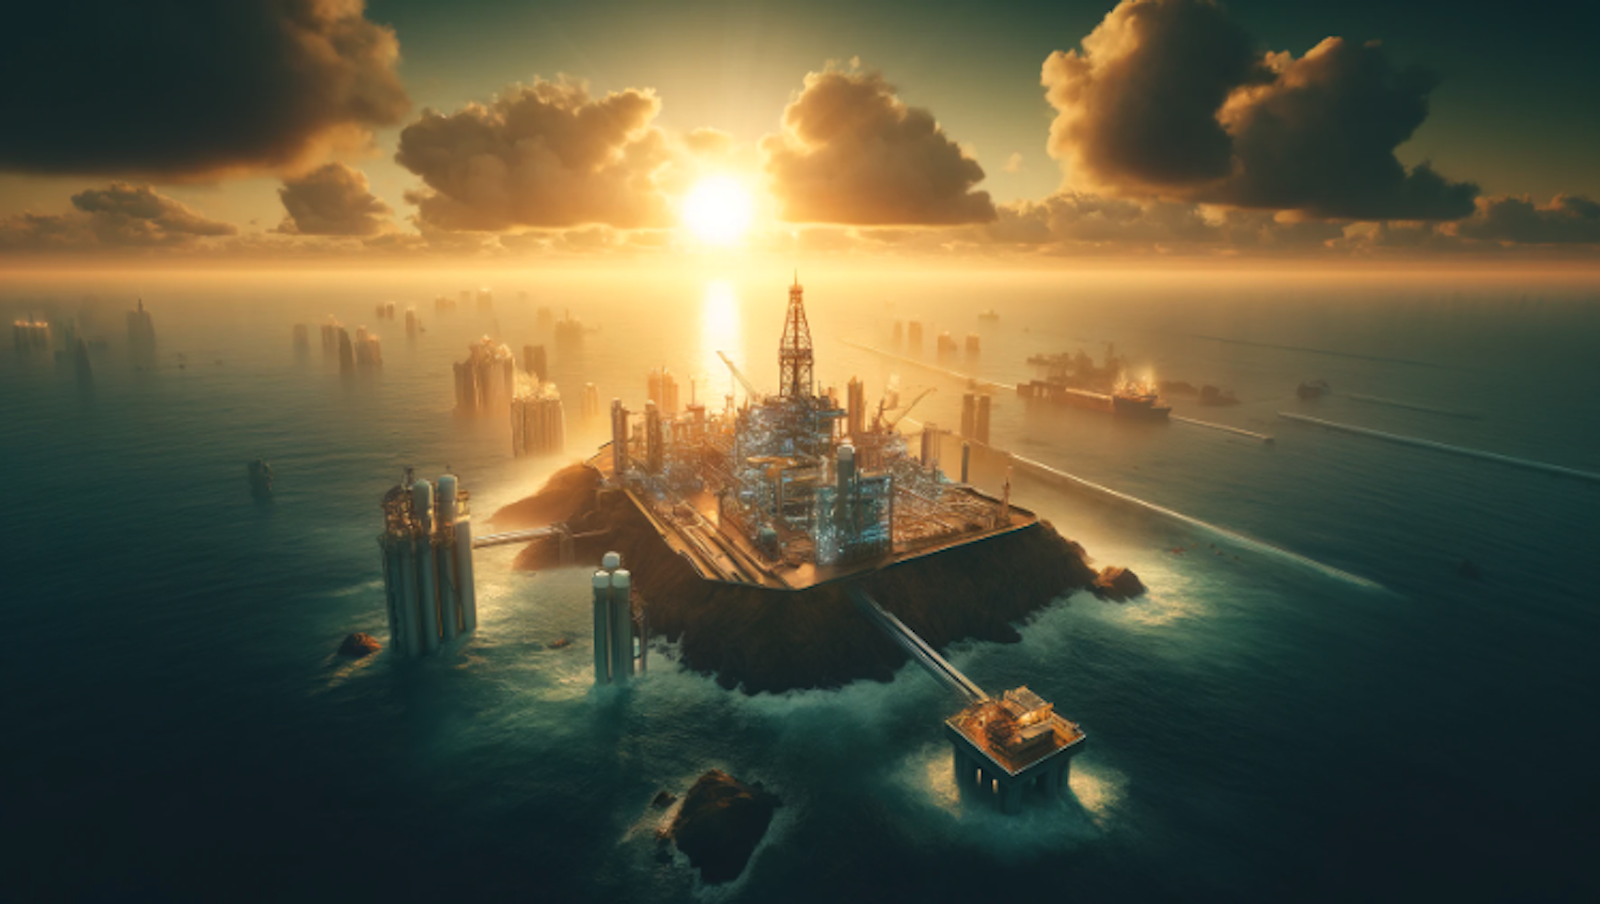 Photorealistic image of Namibia's oil and gas industry featuring an offshore oil rig in the Atlantic Ocean with a golden sunset in the background. Onshore, advanced oil processing facilities and pipelines extend from the coast inland, symbolizing Namibia's emergence as a key player in the global energy market.